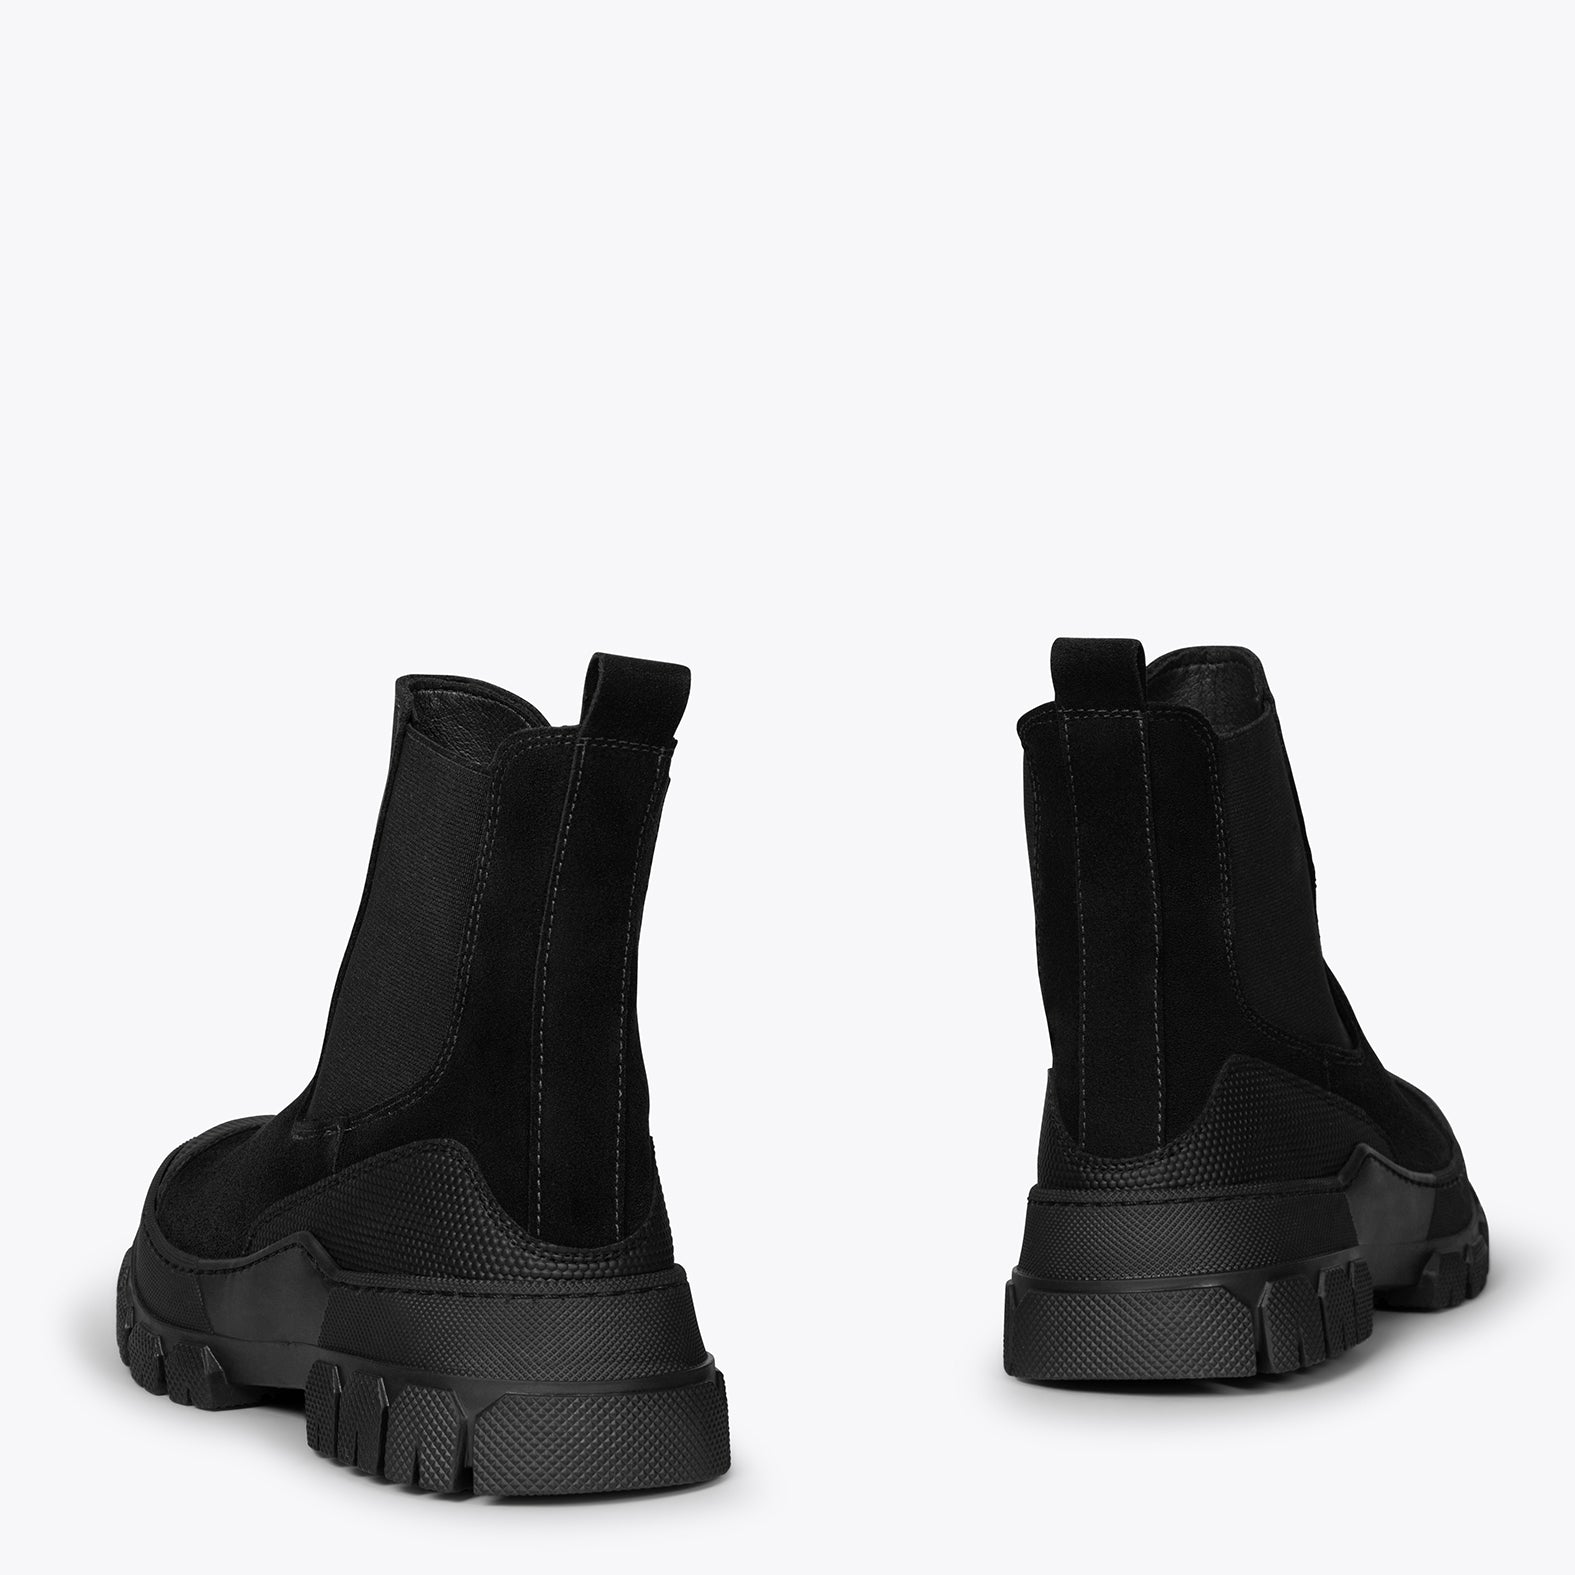 BROOKLYN - BLACK track booties with rubber toe